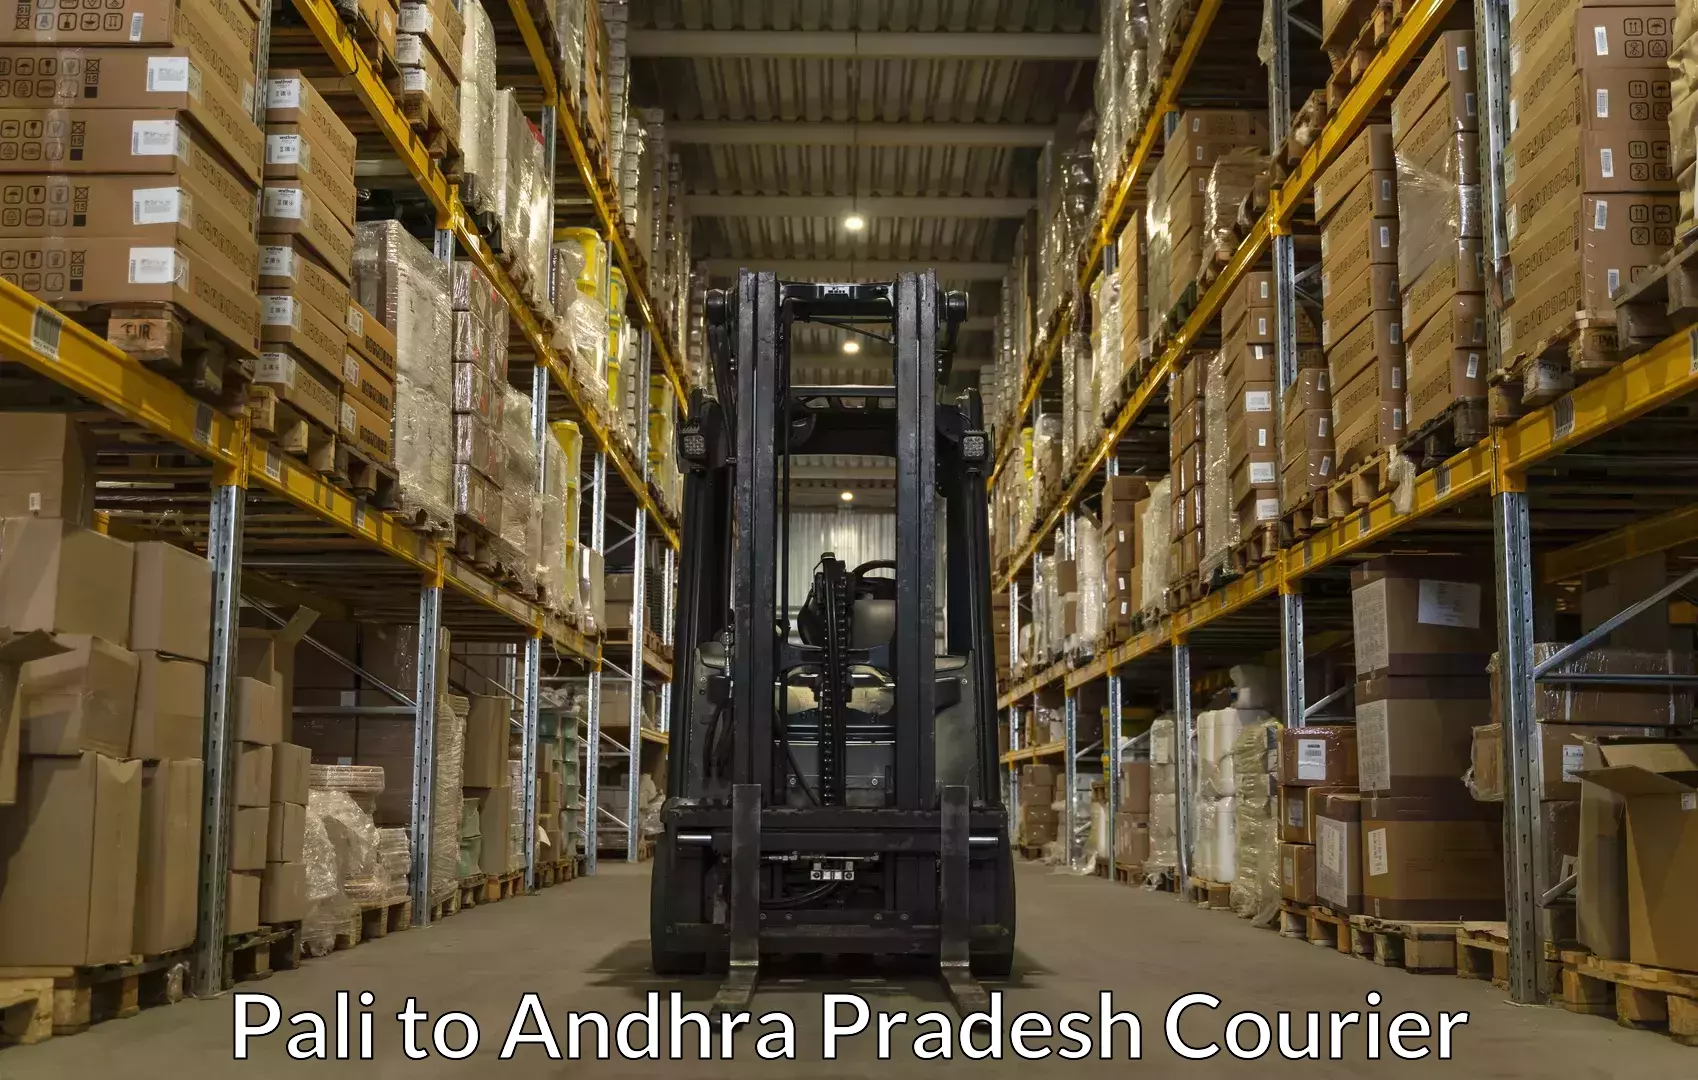 Luggage shipping specialists Pali to Andhra Pradesh